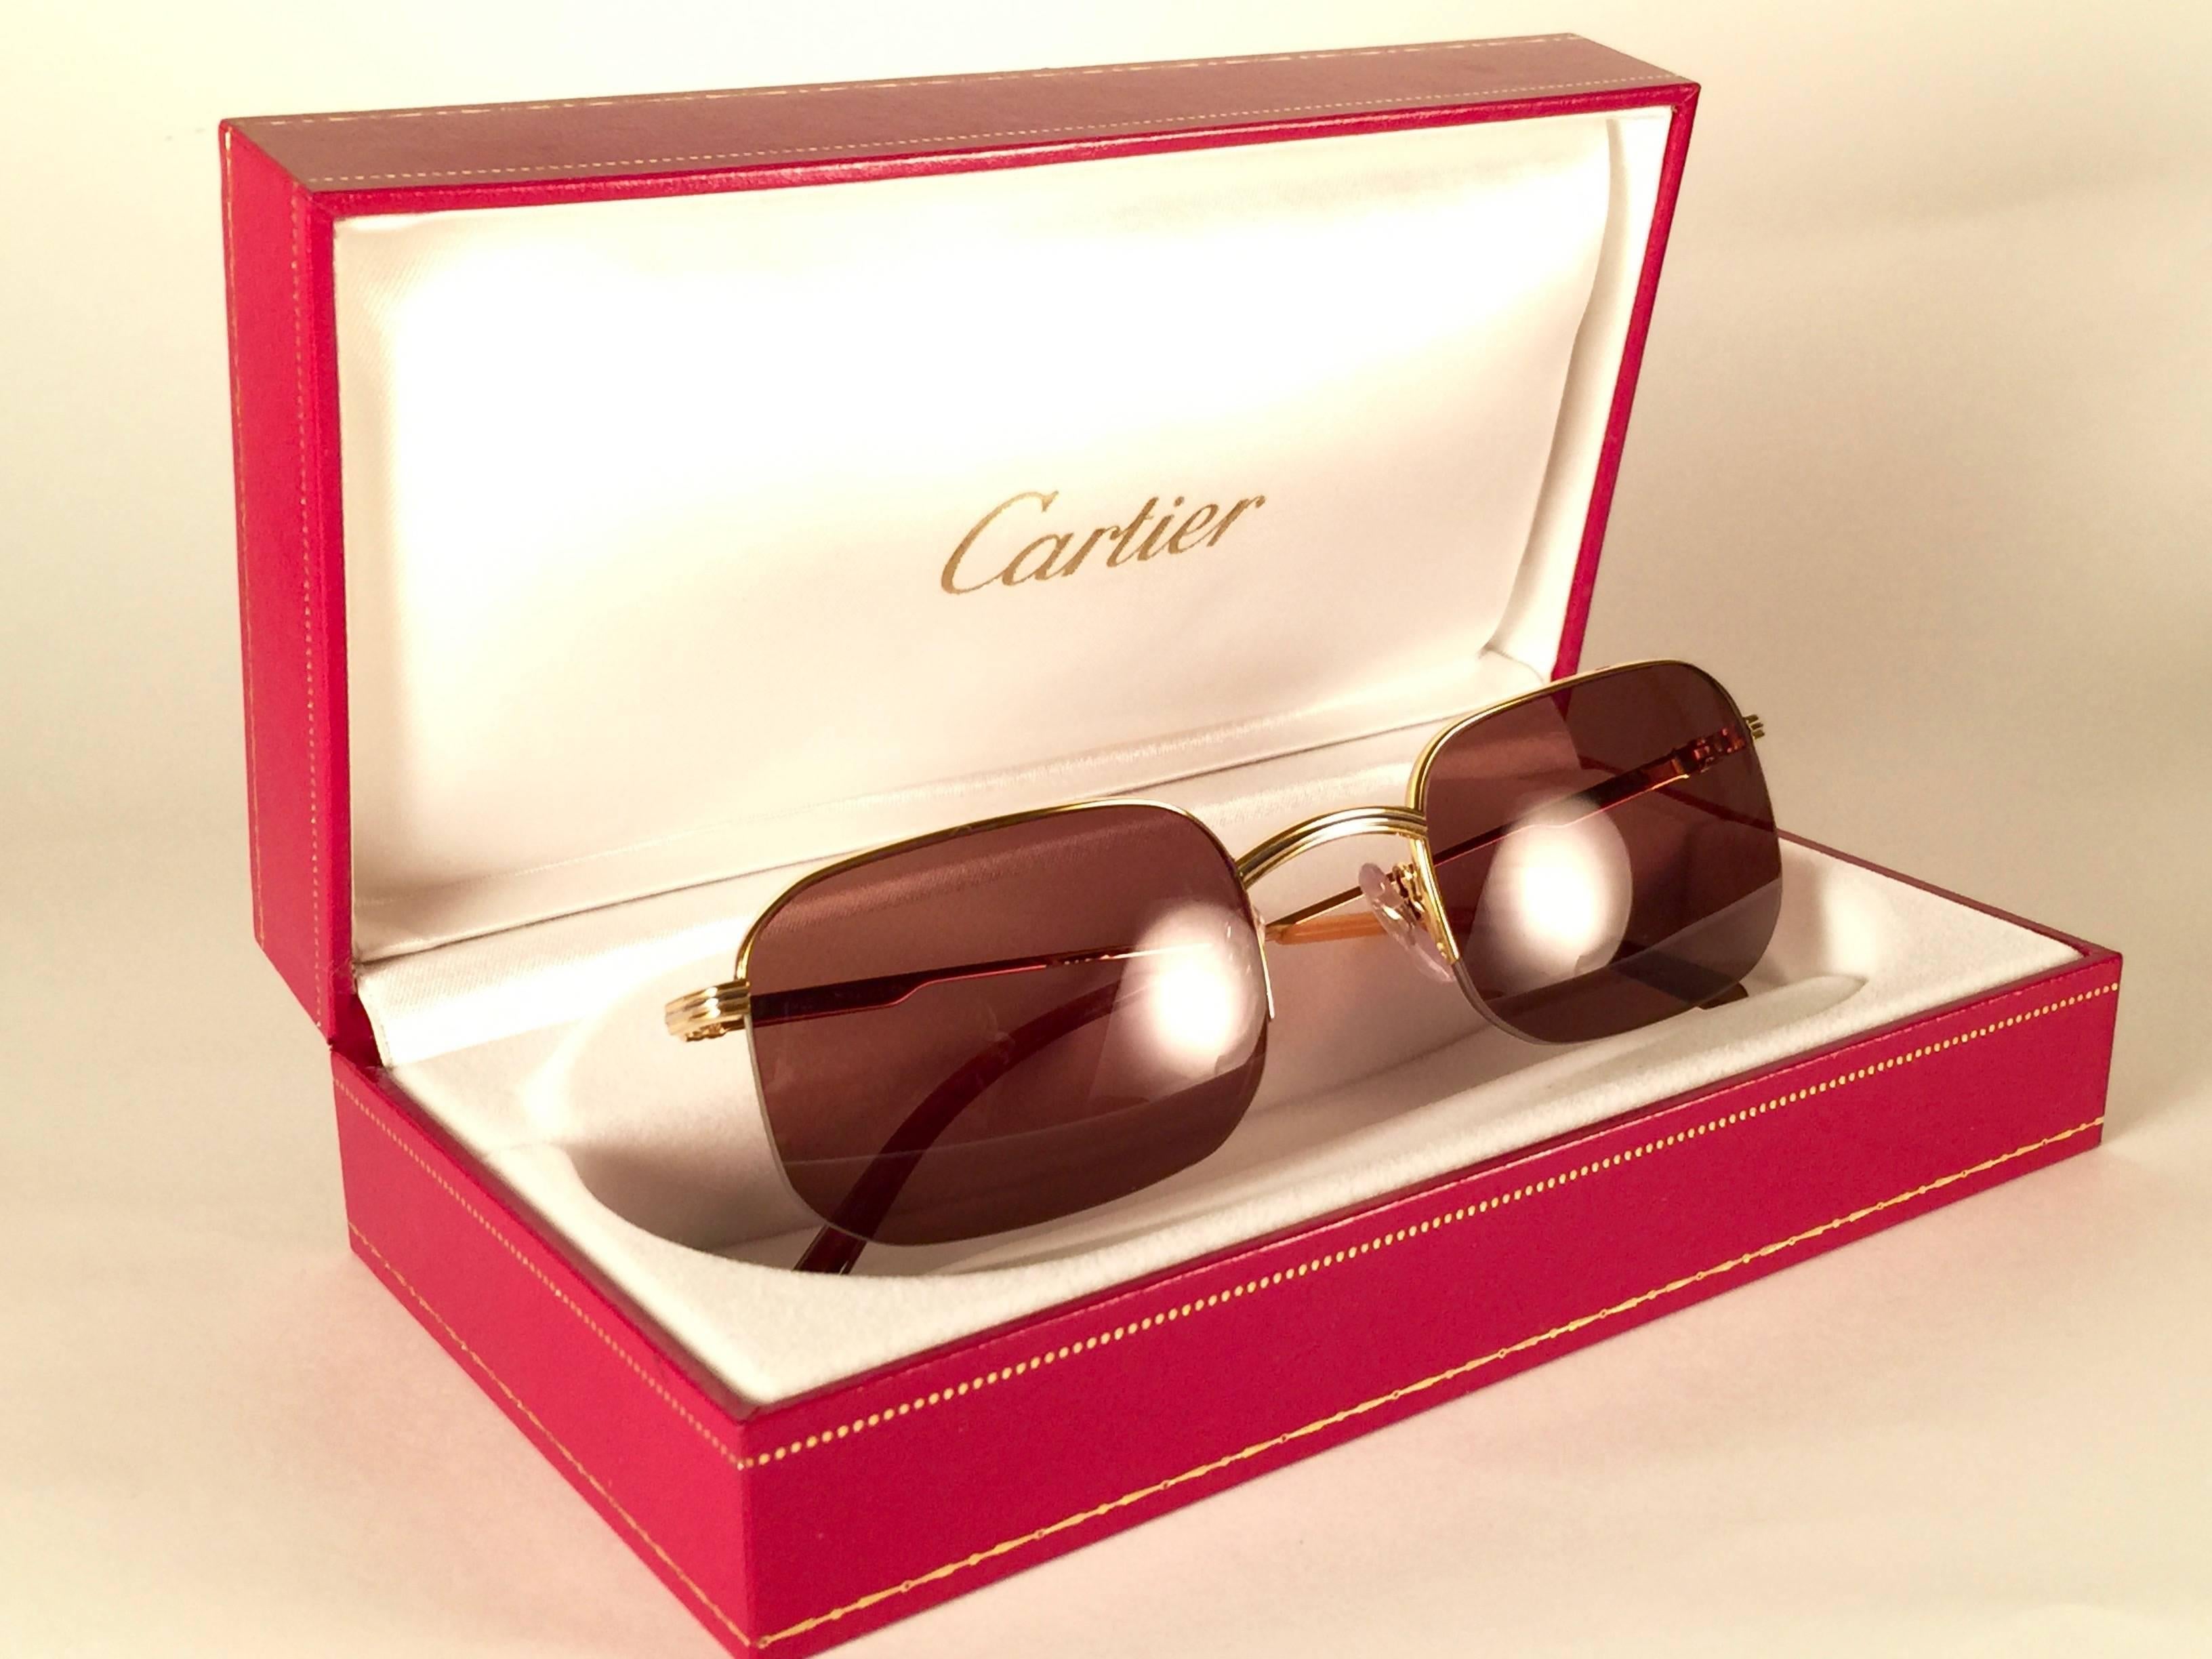 New 1990 Cartier Broadway half frame Vendome 51 [] 23 Sunglasses with brown (uv protection) lenses. All hallmarks. Cartier gold signs on the ear paddles. These are like a pair of jewels on your nose. Please notice that this sunglasses are nearly 30